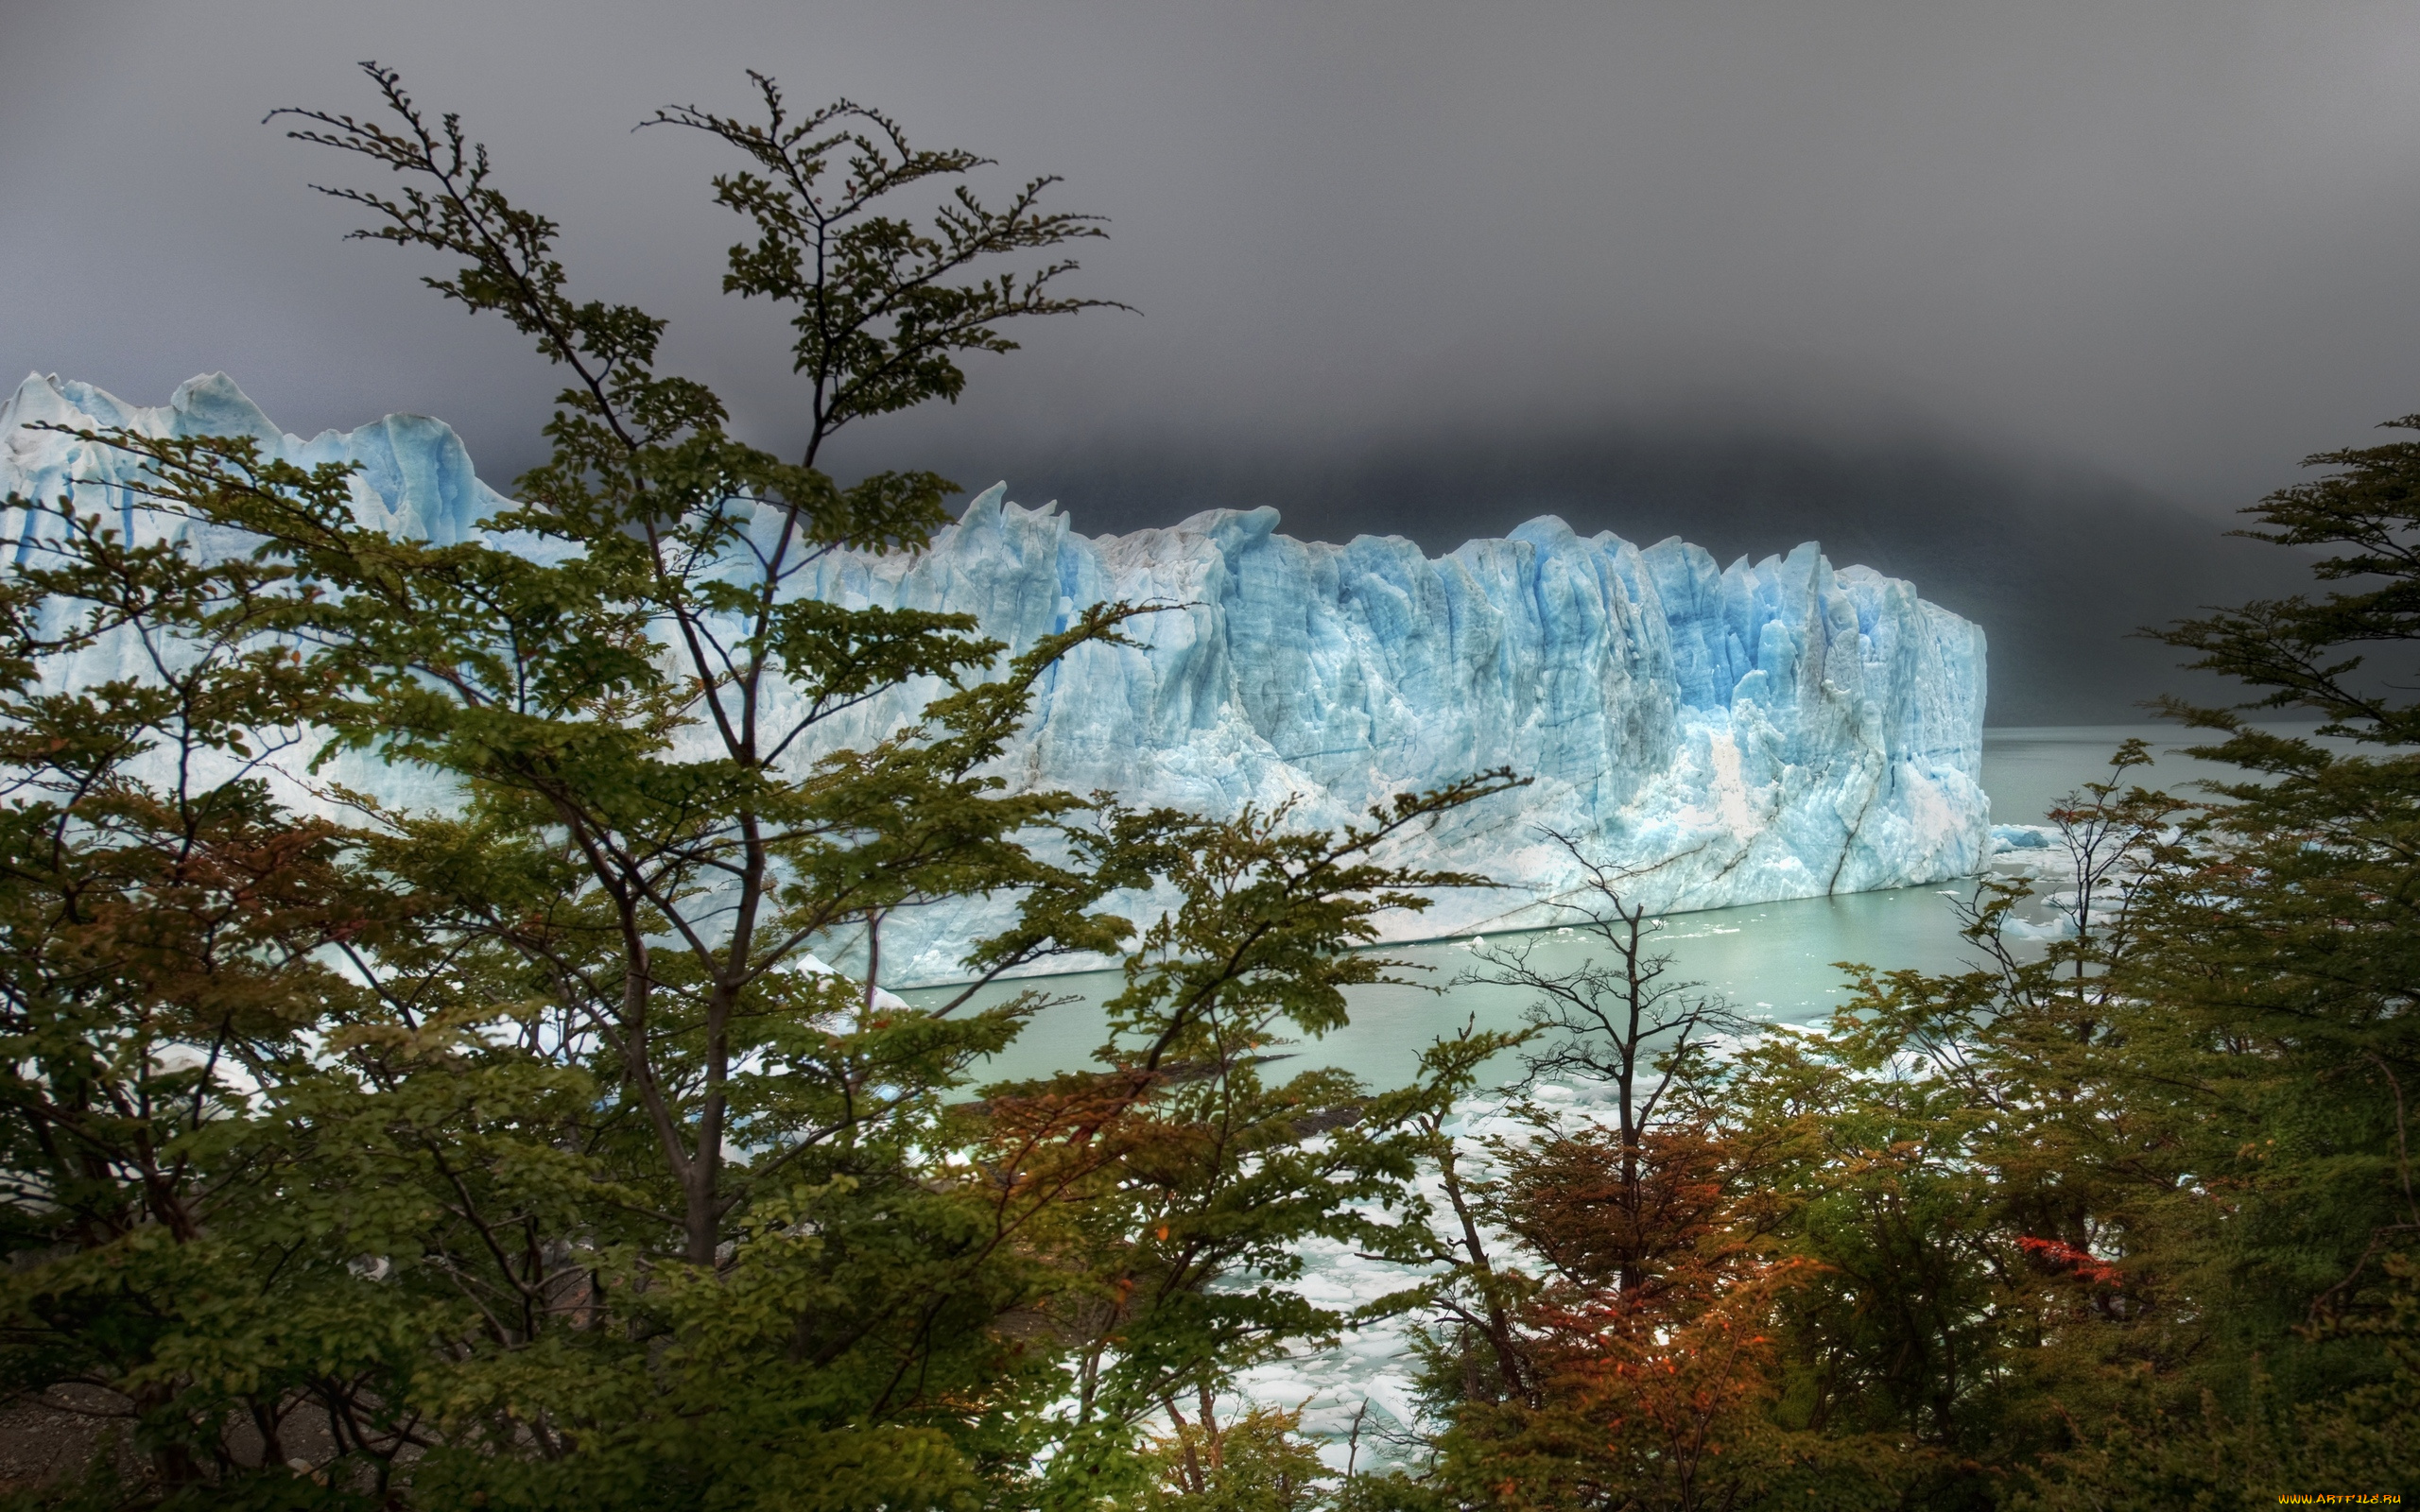 and, then, hiked, through, the, autumn, trees, to, find, glacier, природа, айсберги, ледники